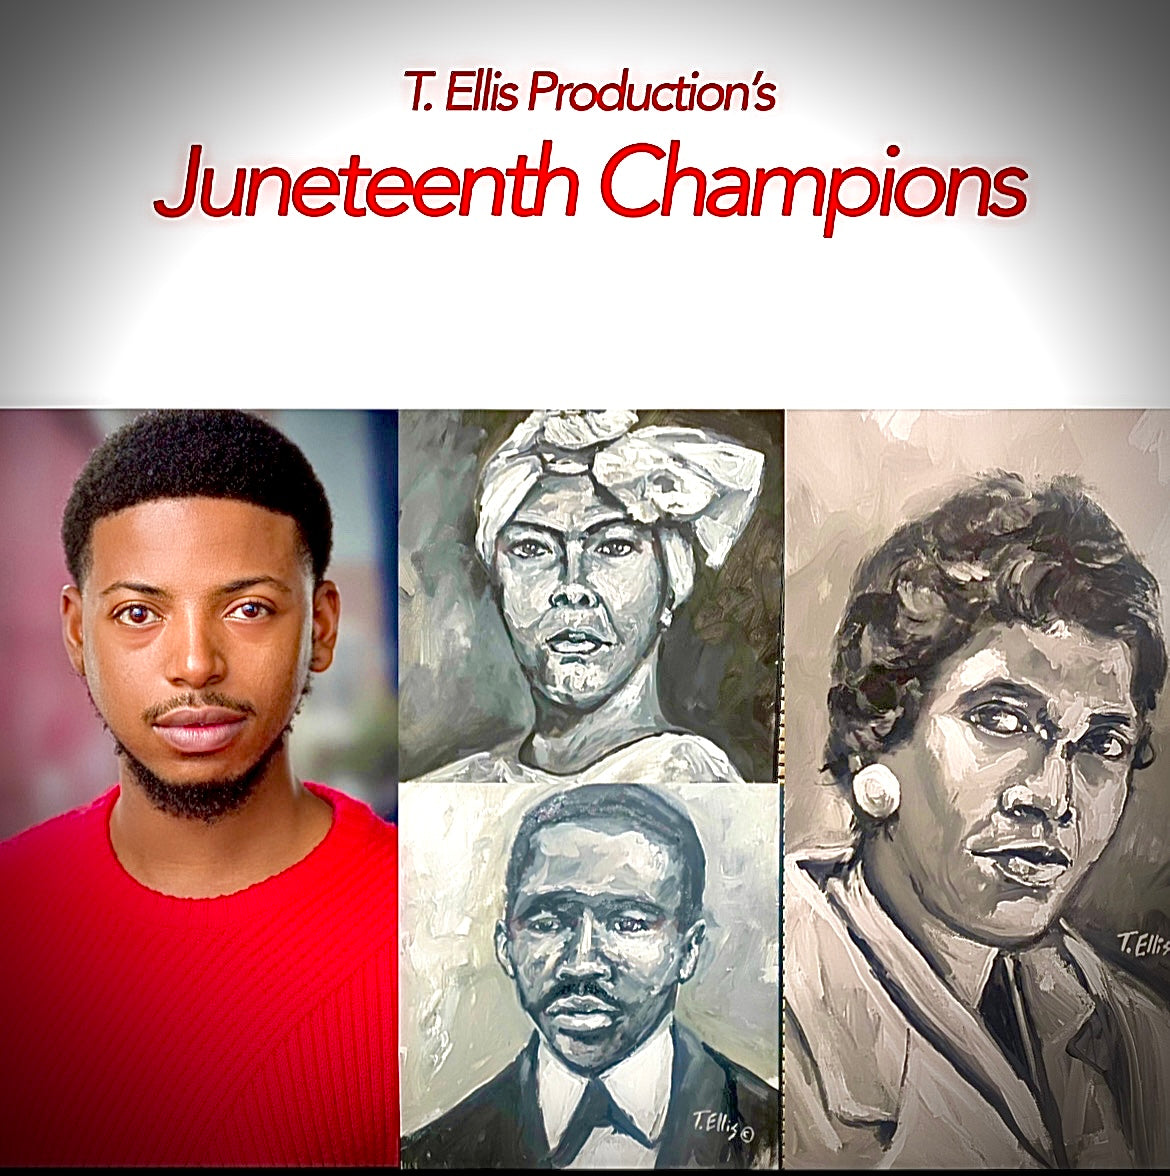 Load video: The official trailer for T. Ellis’s Juneteenth Champions Documentary, Starring Tanner T. Ellis